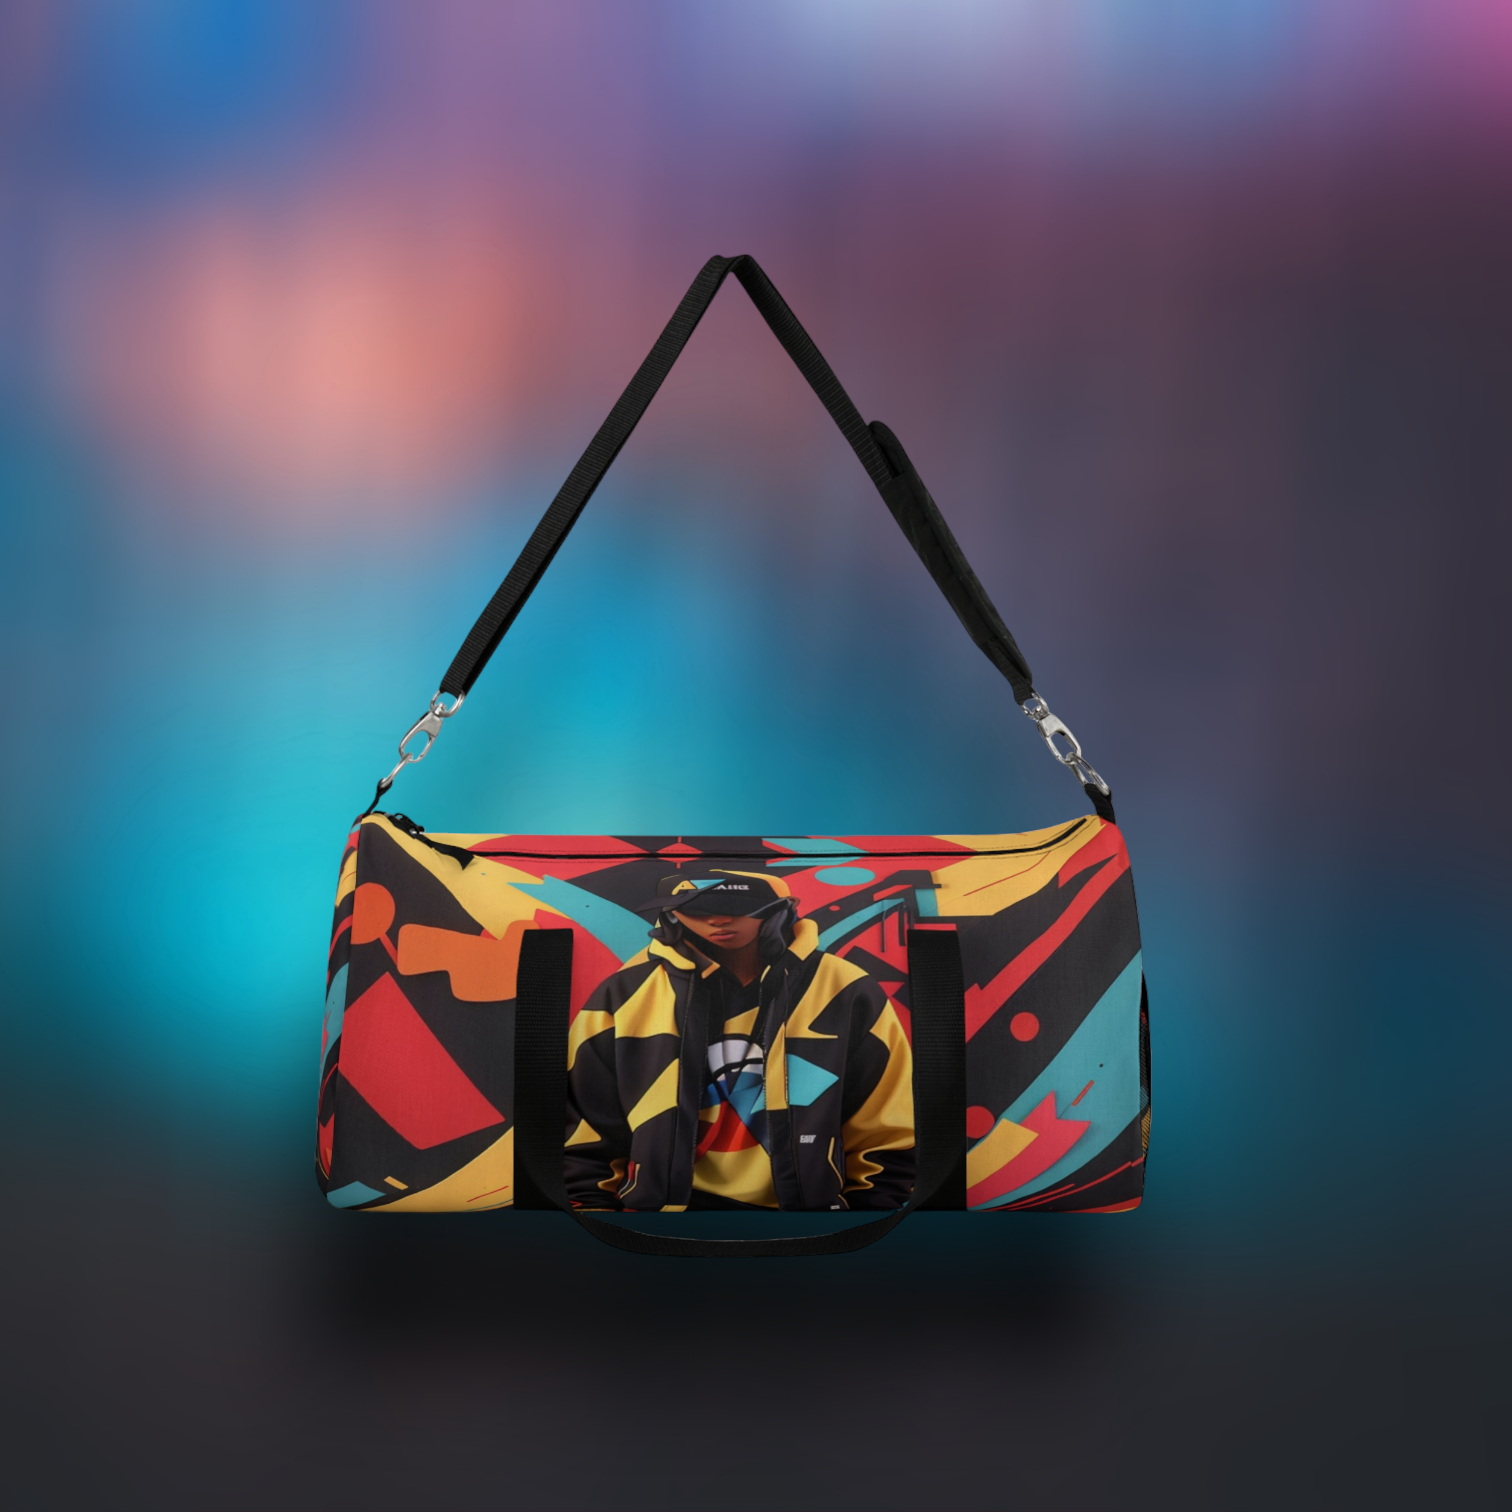 "Street Art at Your Back Duffle: An Urban Nomad's Essentials - The Ultimate Blend of Practicality, Hip-Hop, Street Style, and Striking Design" Bags Bigger Than Life   